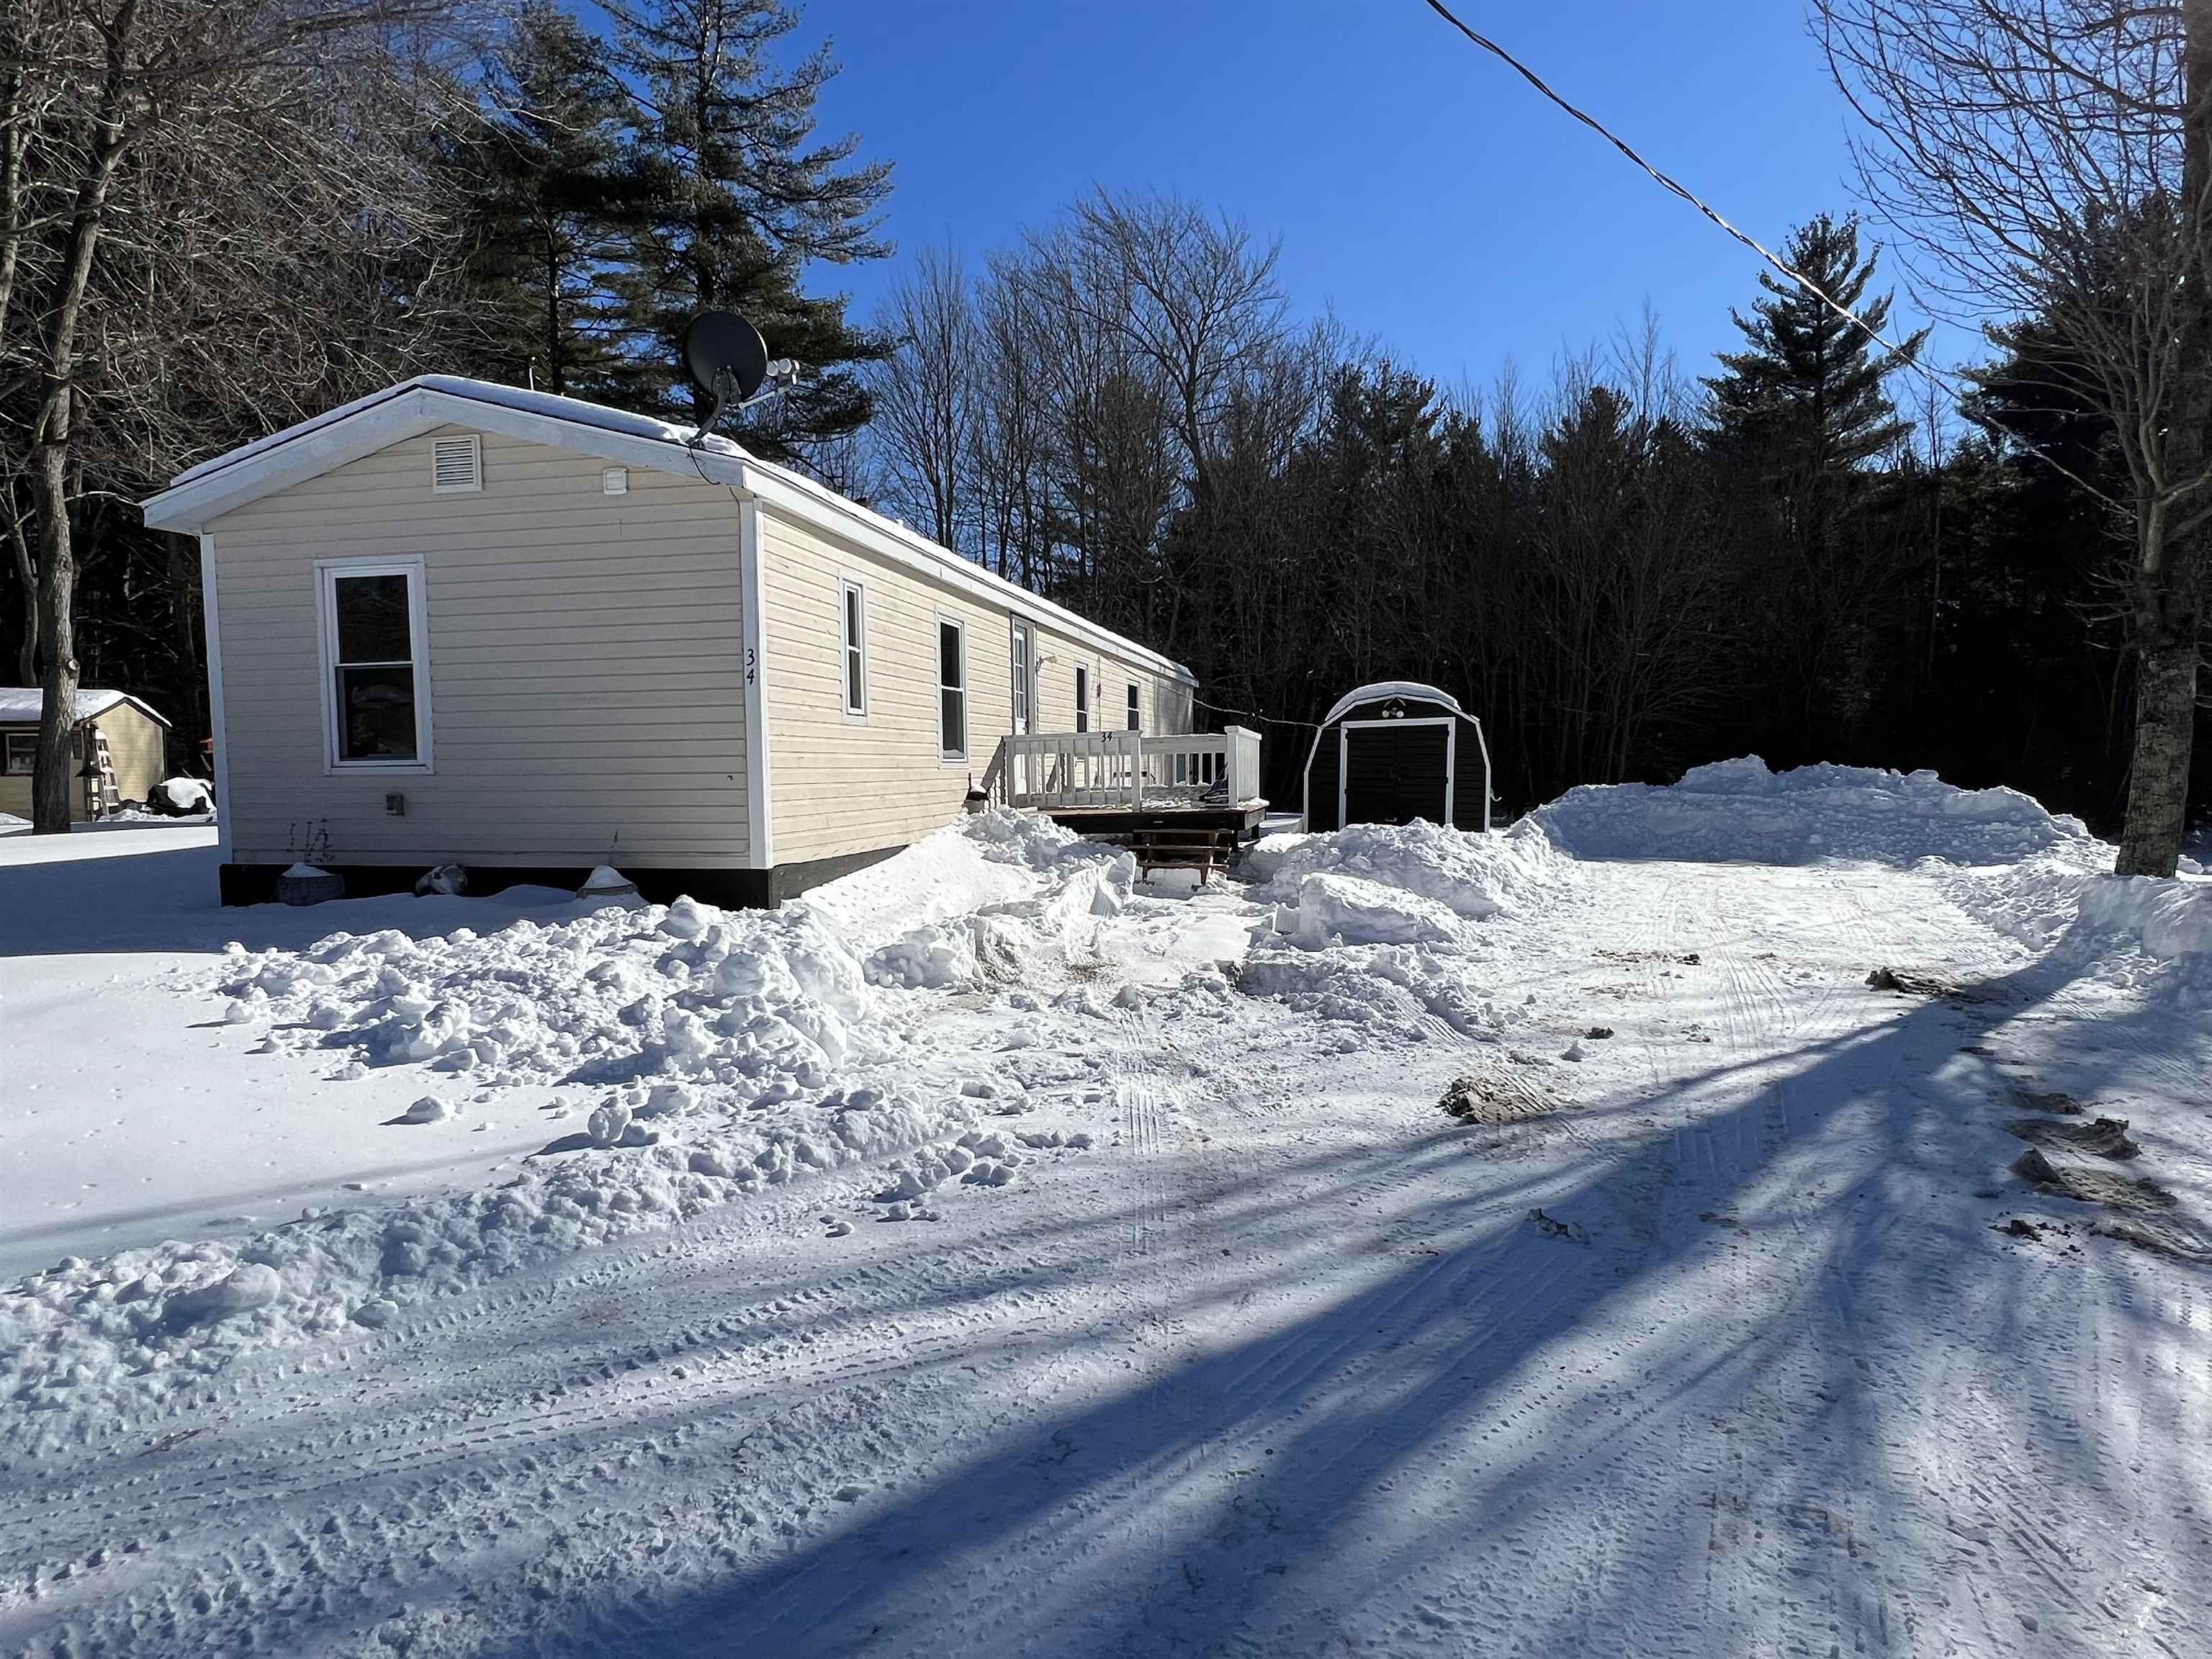 34 Vaillancourt Dr, New Ipswich, NH 03071 - MLS 4896657 - Coldwell Banker